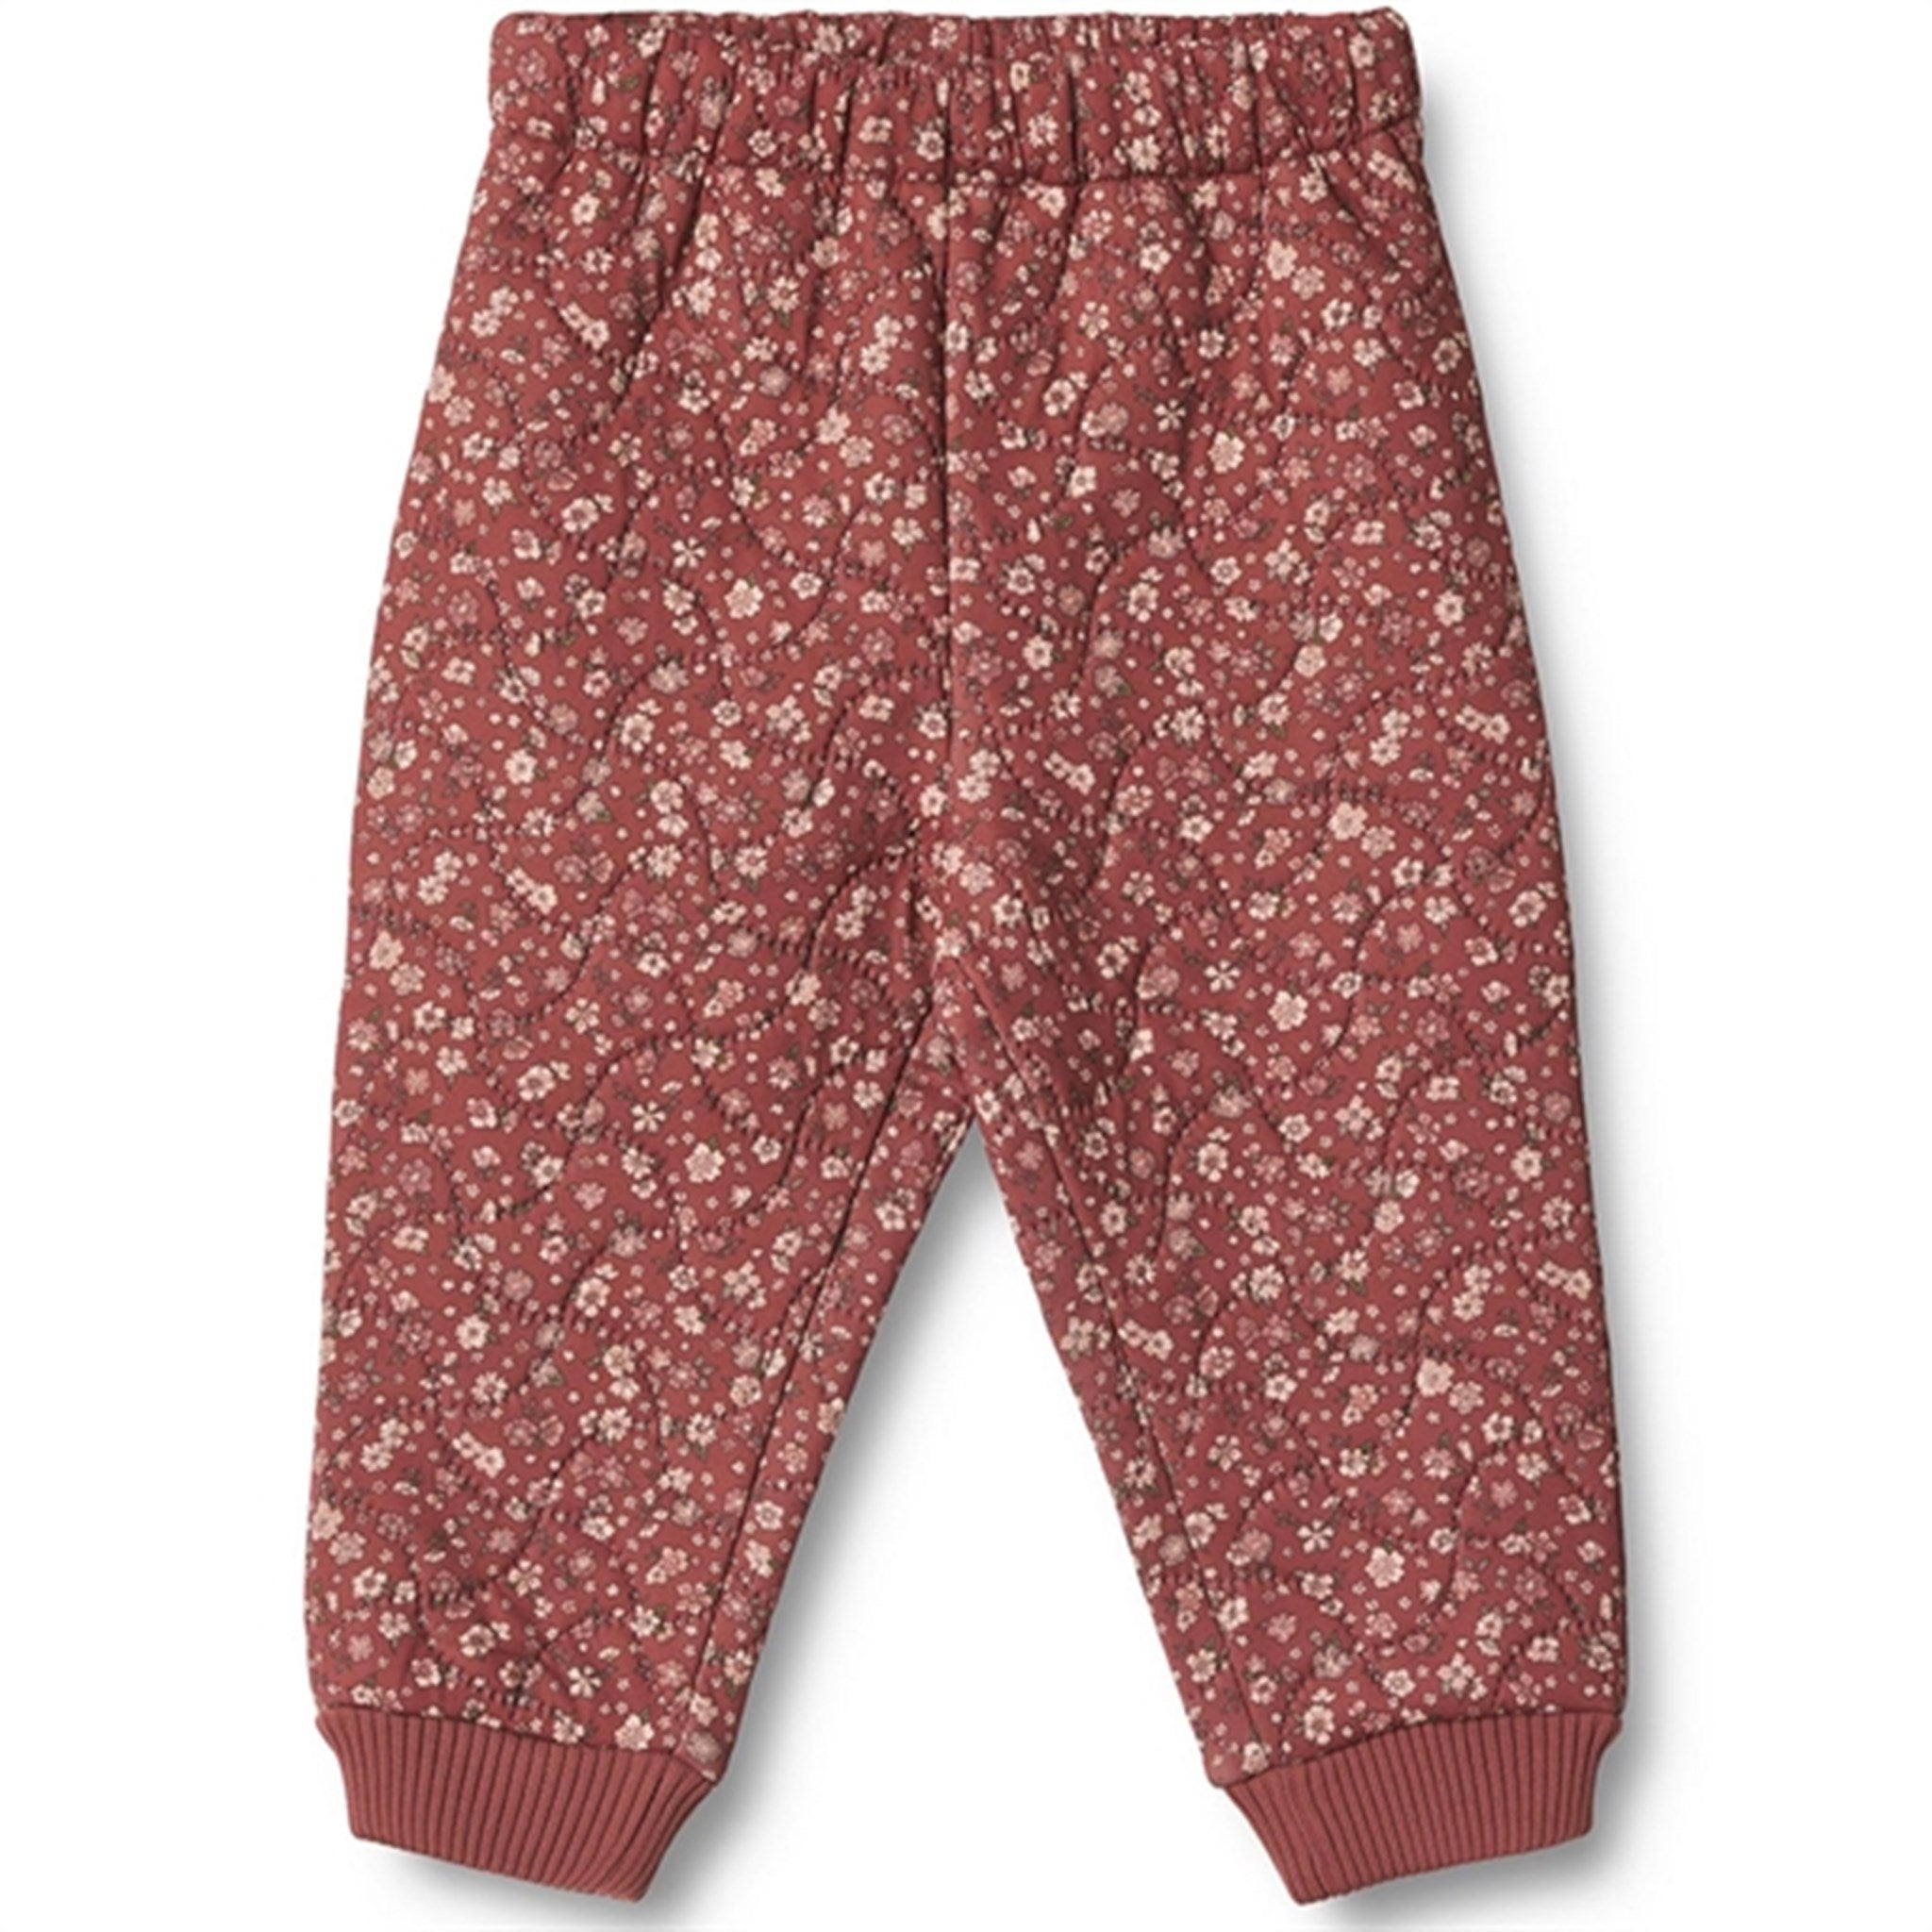 Wheat Thermo Red Flowers Pants Alex